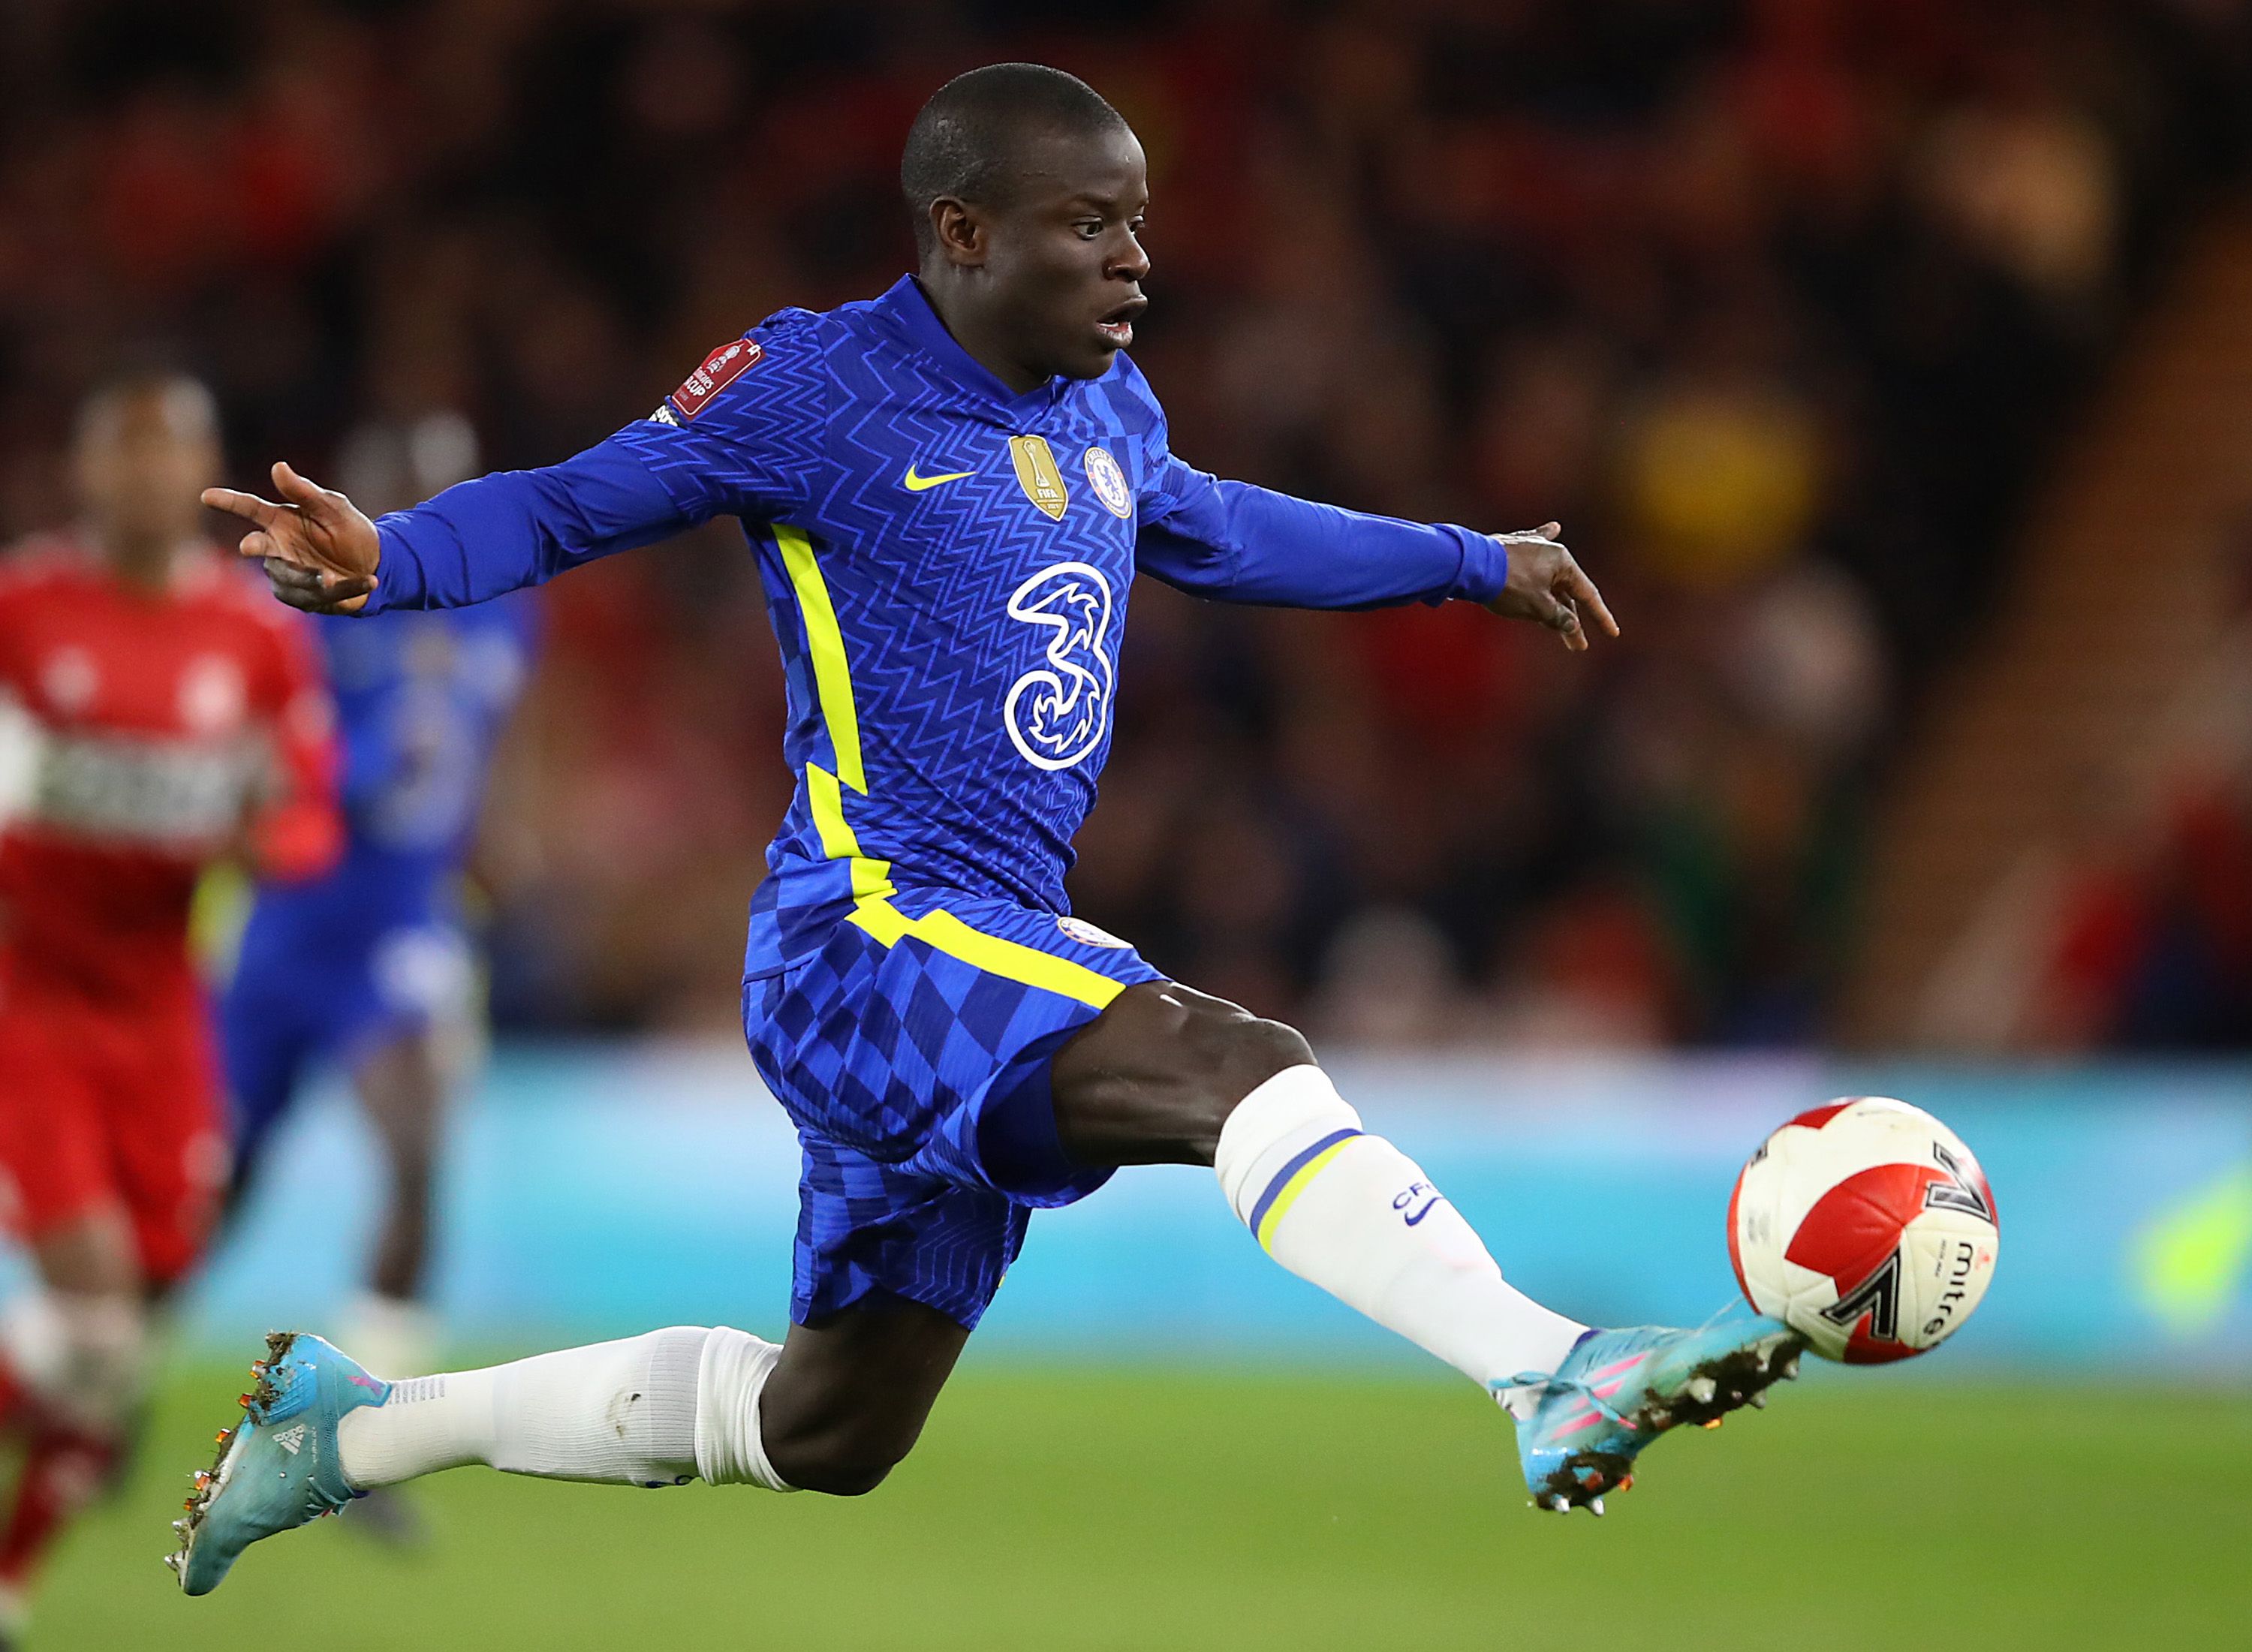 Ngolo Kante of Chelsea runs with the ball during the Emirates FA Cup Quarter Final match between Middlesbrough v Chelsea at Riverside Stadium on March 19, 2022 in Middlesbrough, England